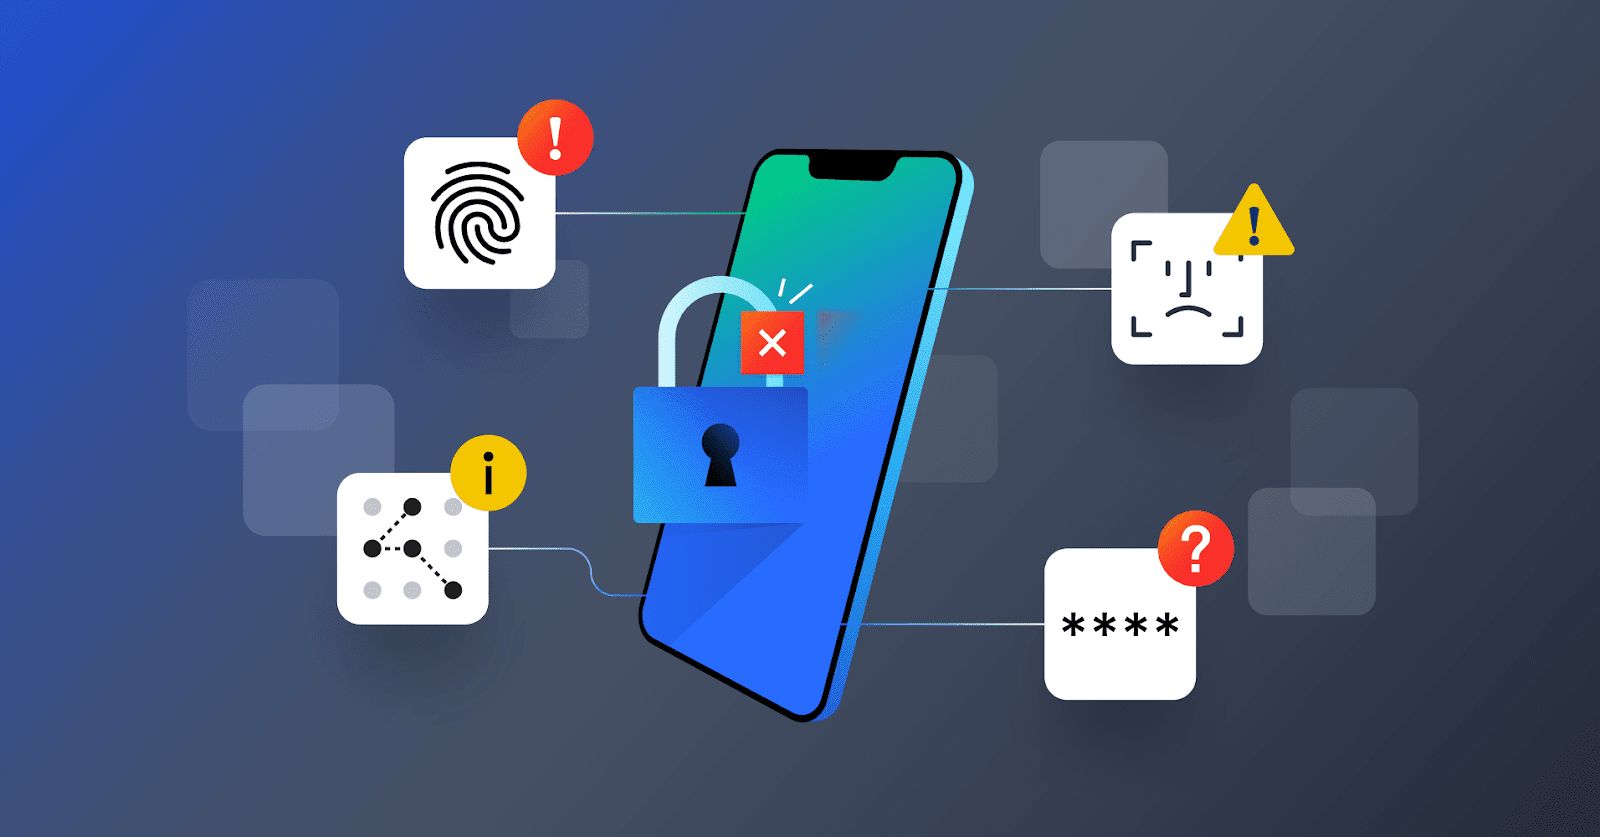 6 Ways to Make Authentication Systems More User-friendly